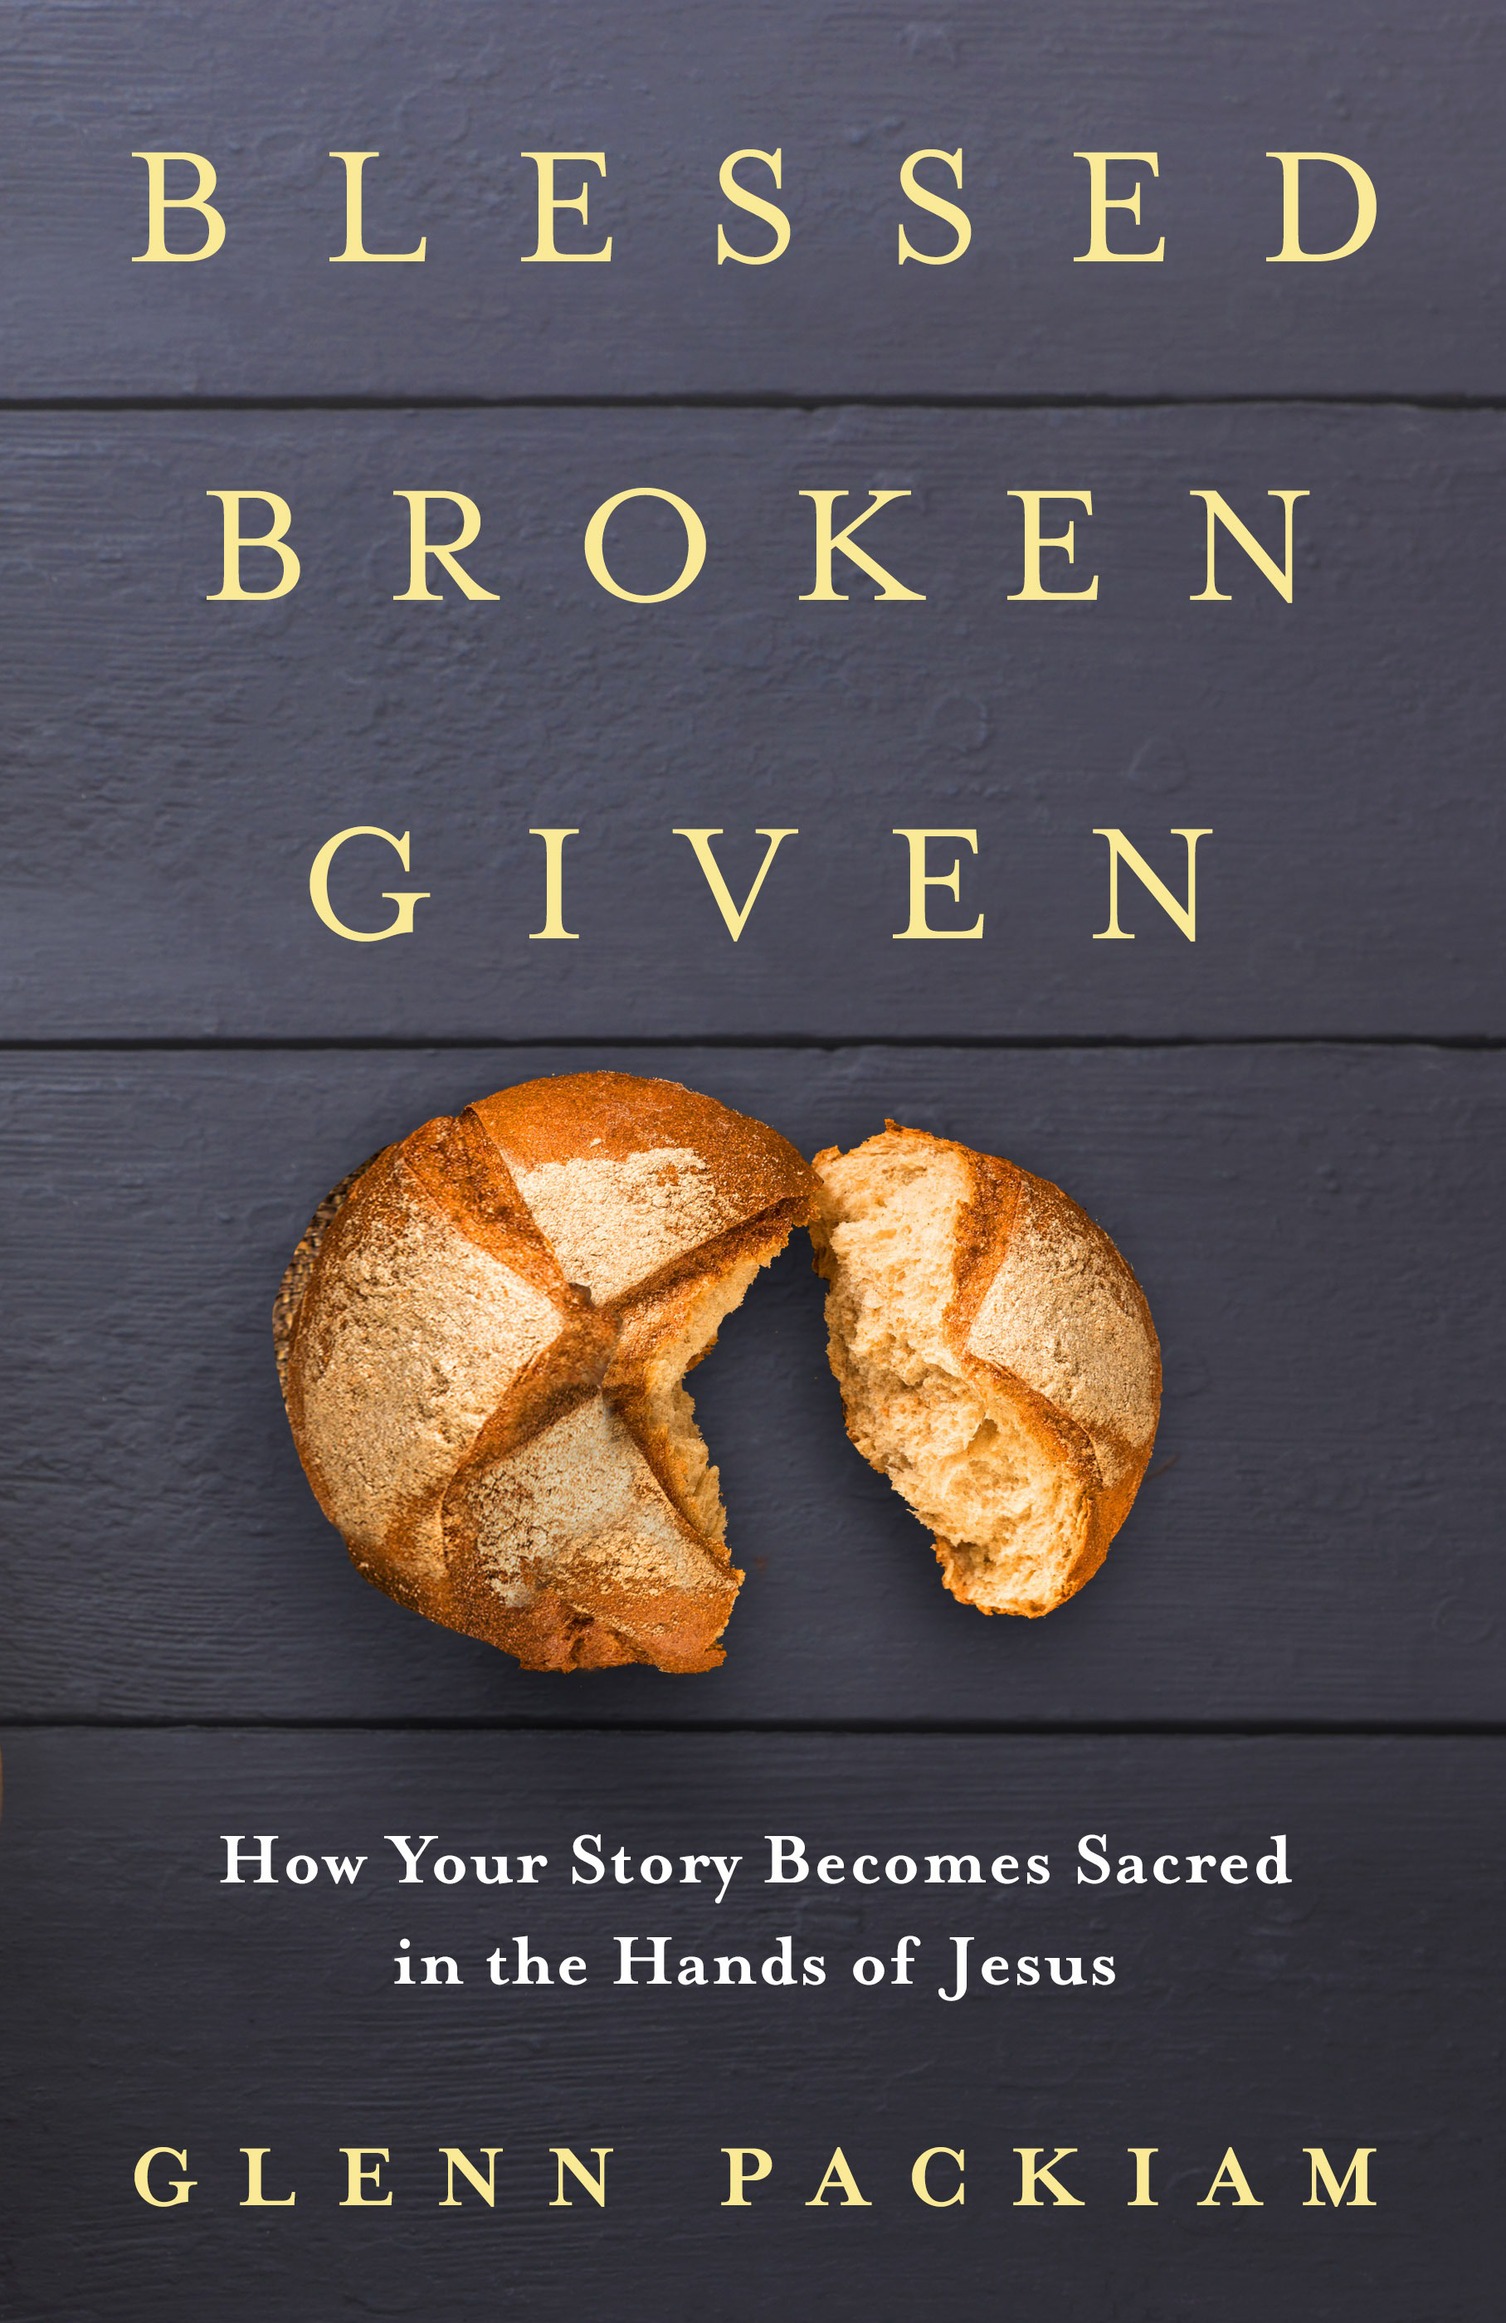 Praise for Blessed Broken Given This book immerses us in the miraculous story - photo 1